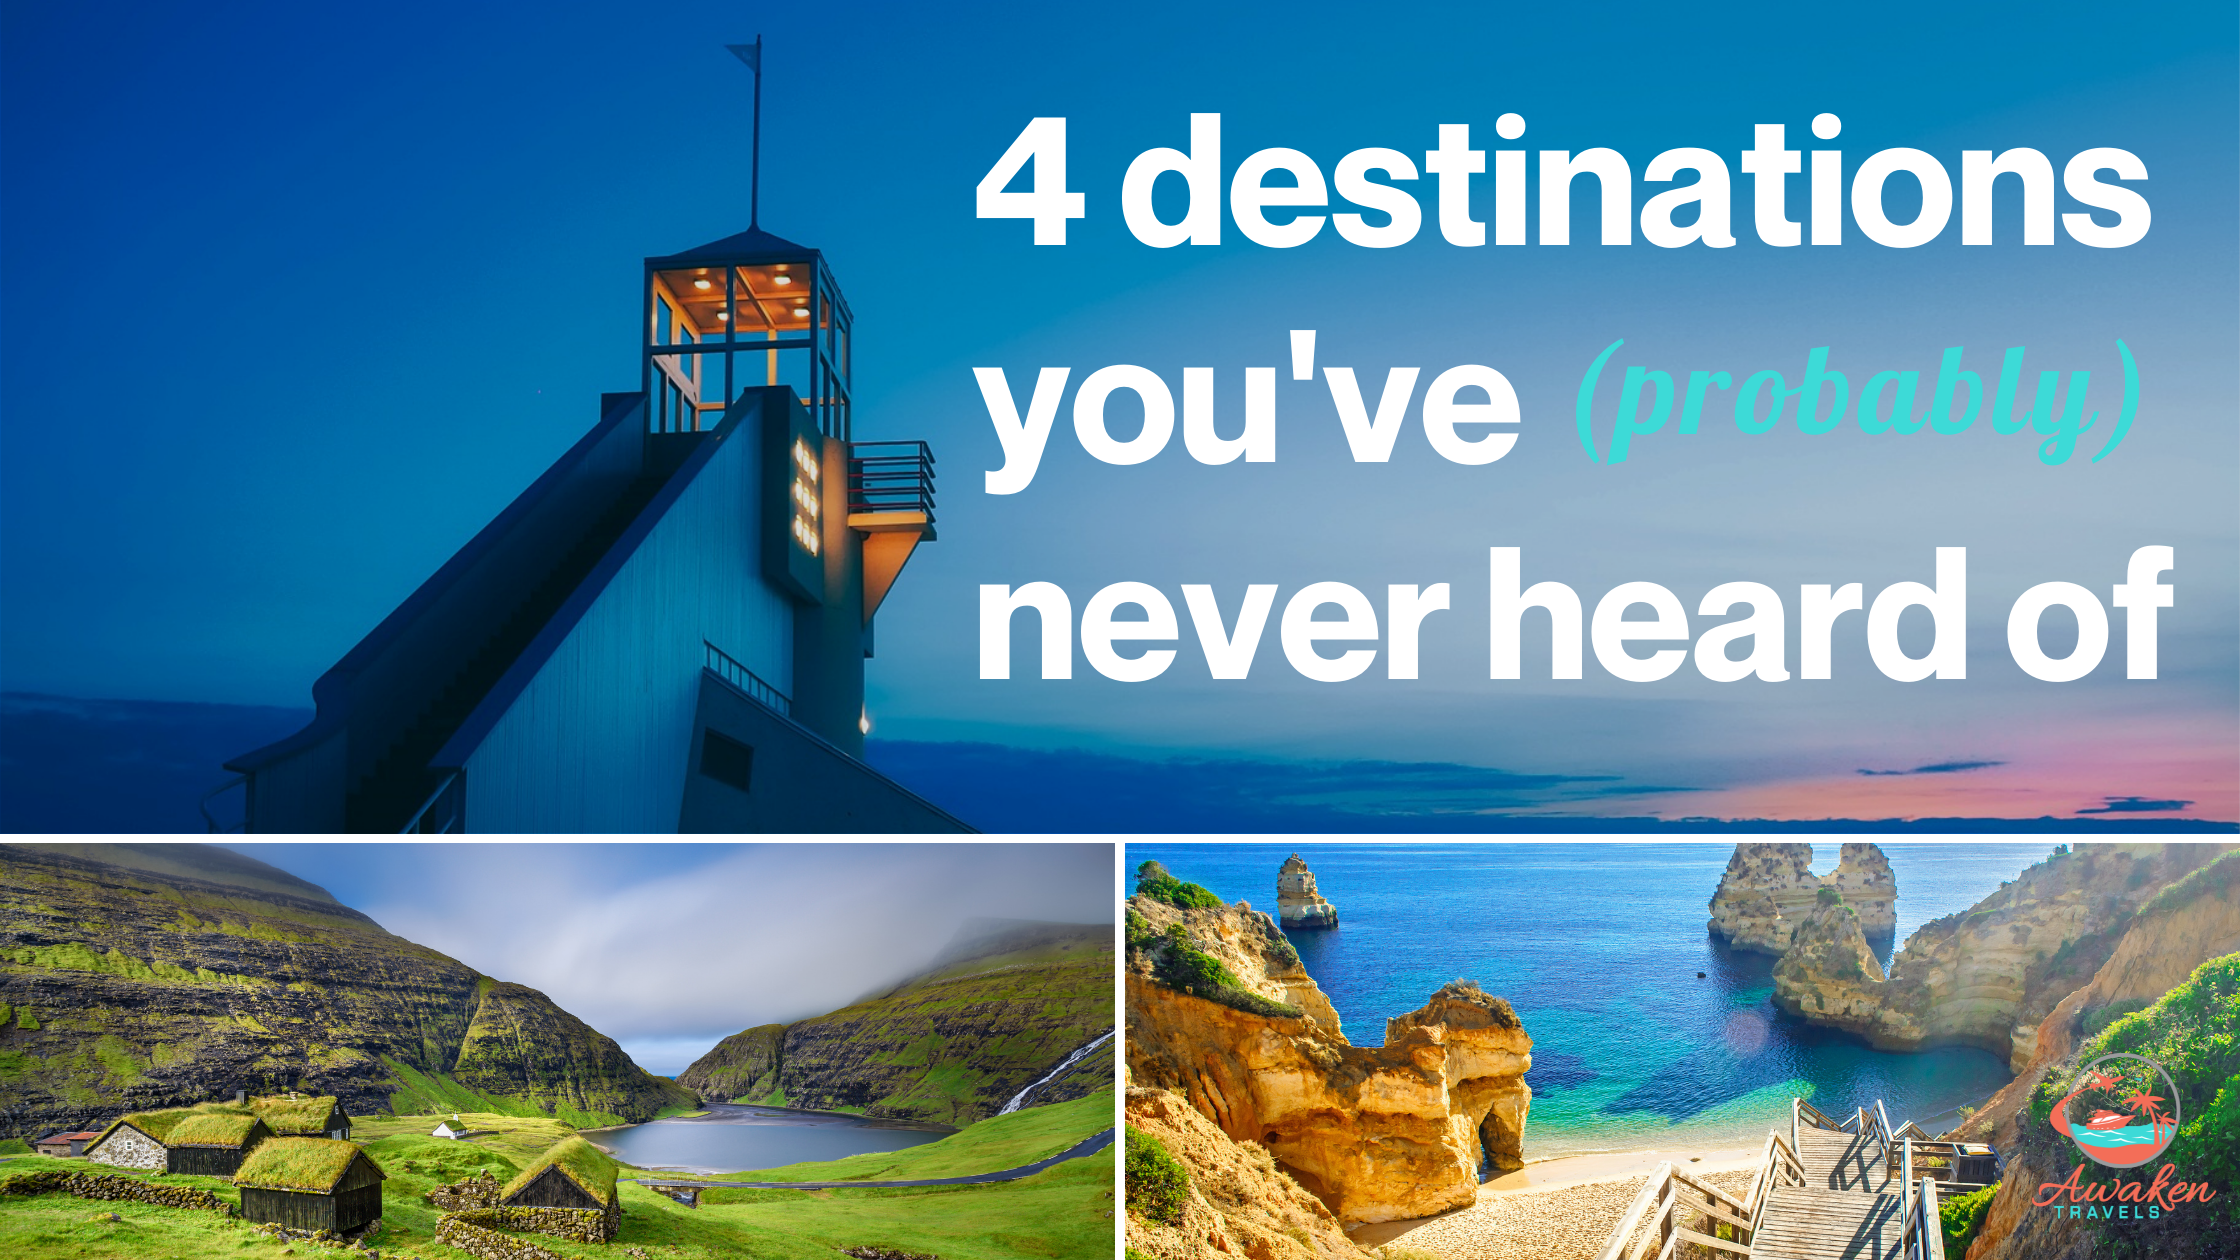 4 Places You’ve (Probably) Never Heard of That Could Make for the Best Vacation